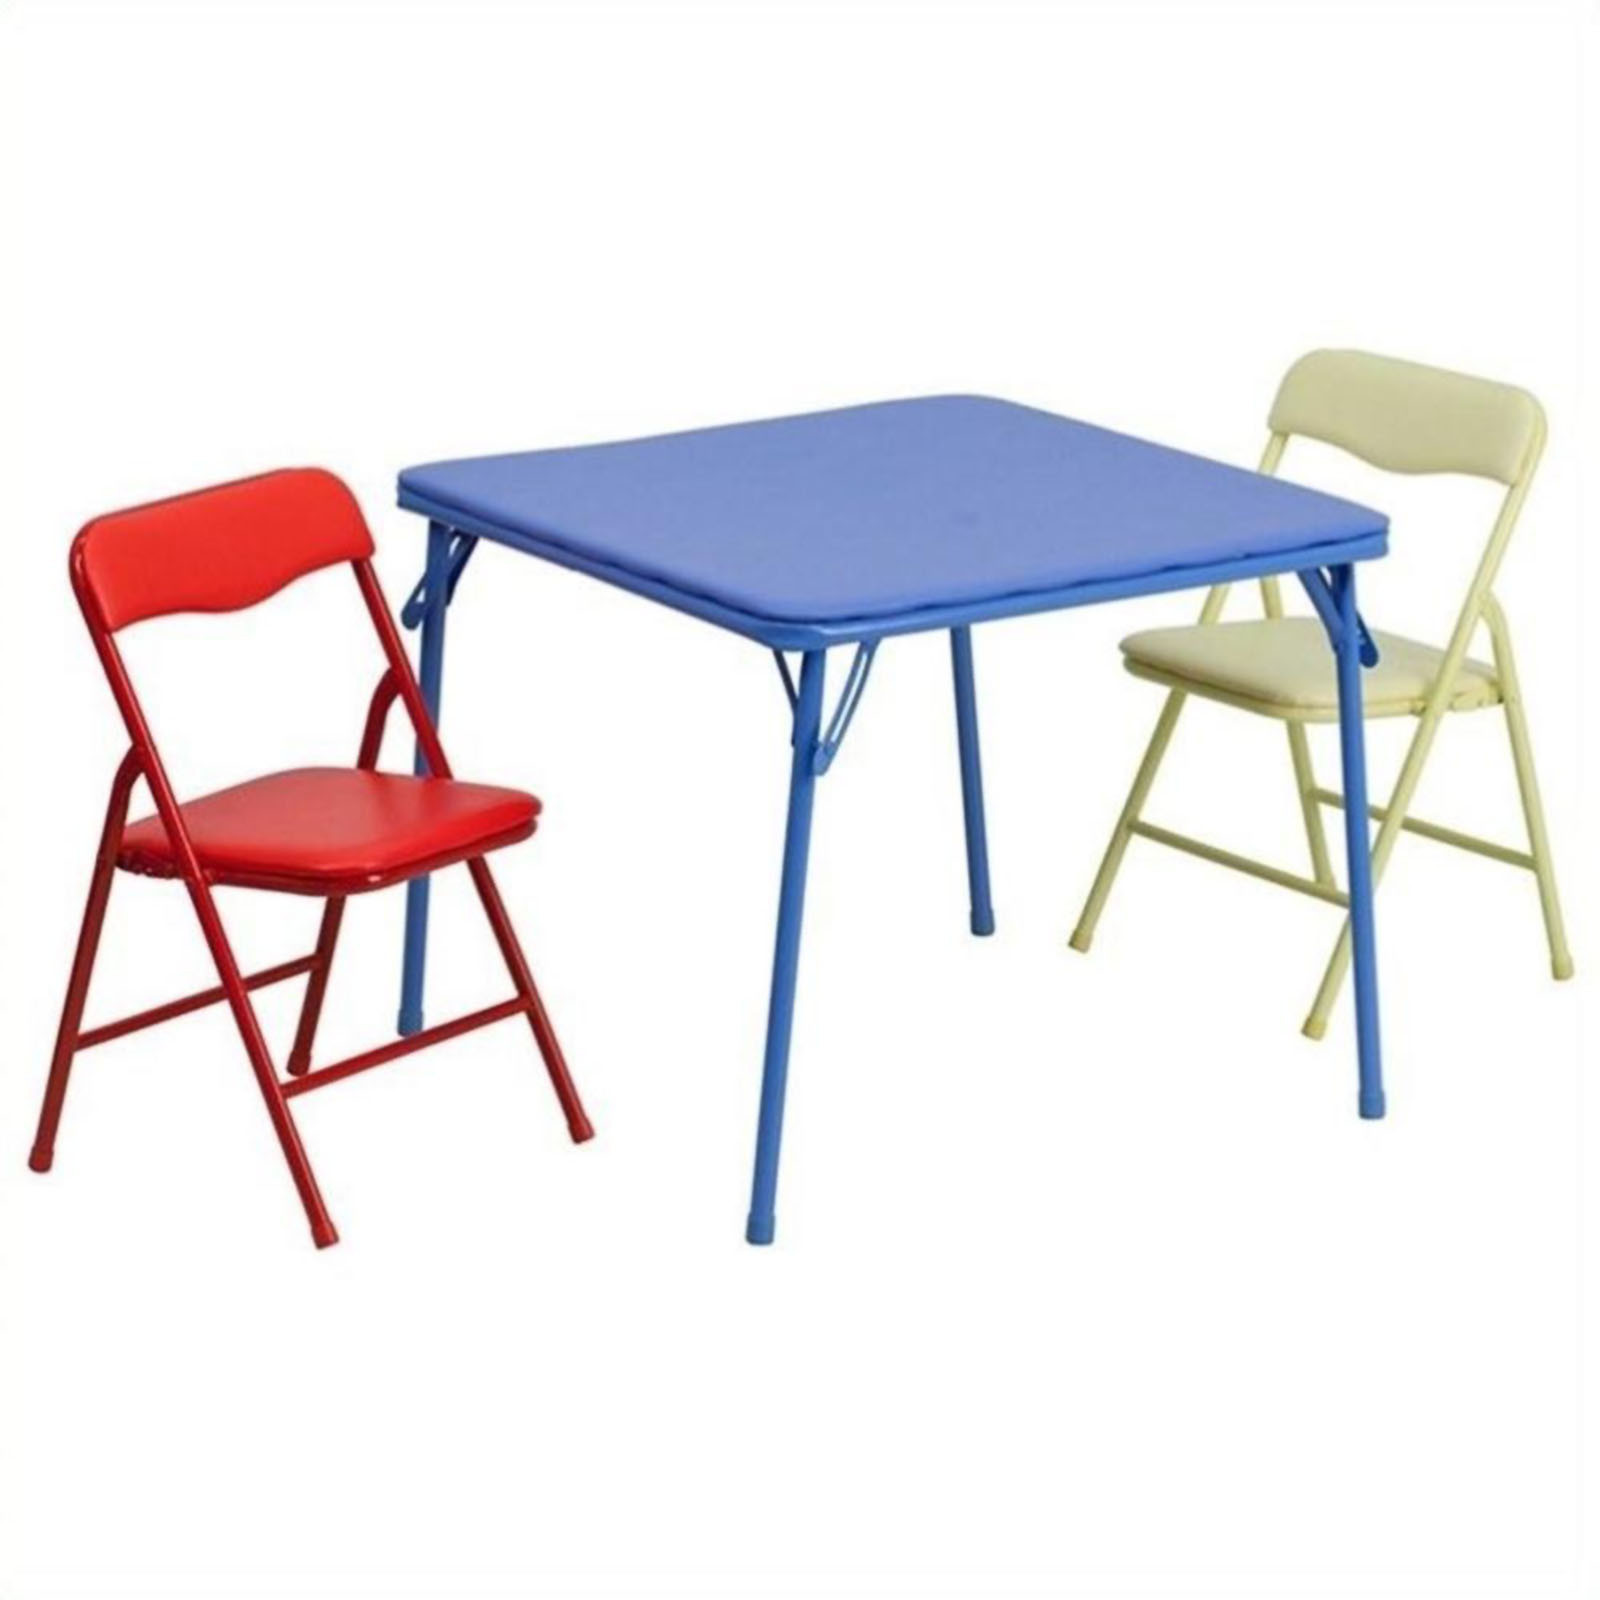 Kids Foldable Table And Chairs
 Lancaster Home 3pc Kids Folding Table and Chair Set Sears